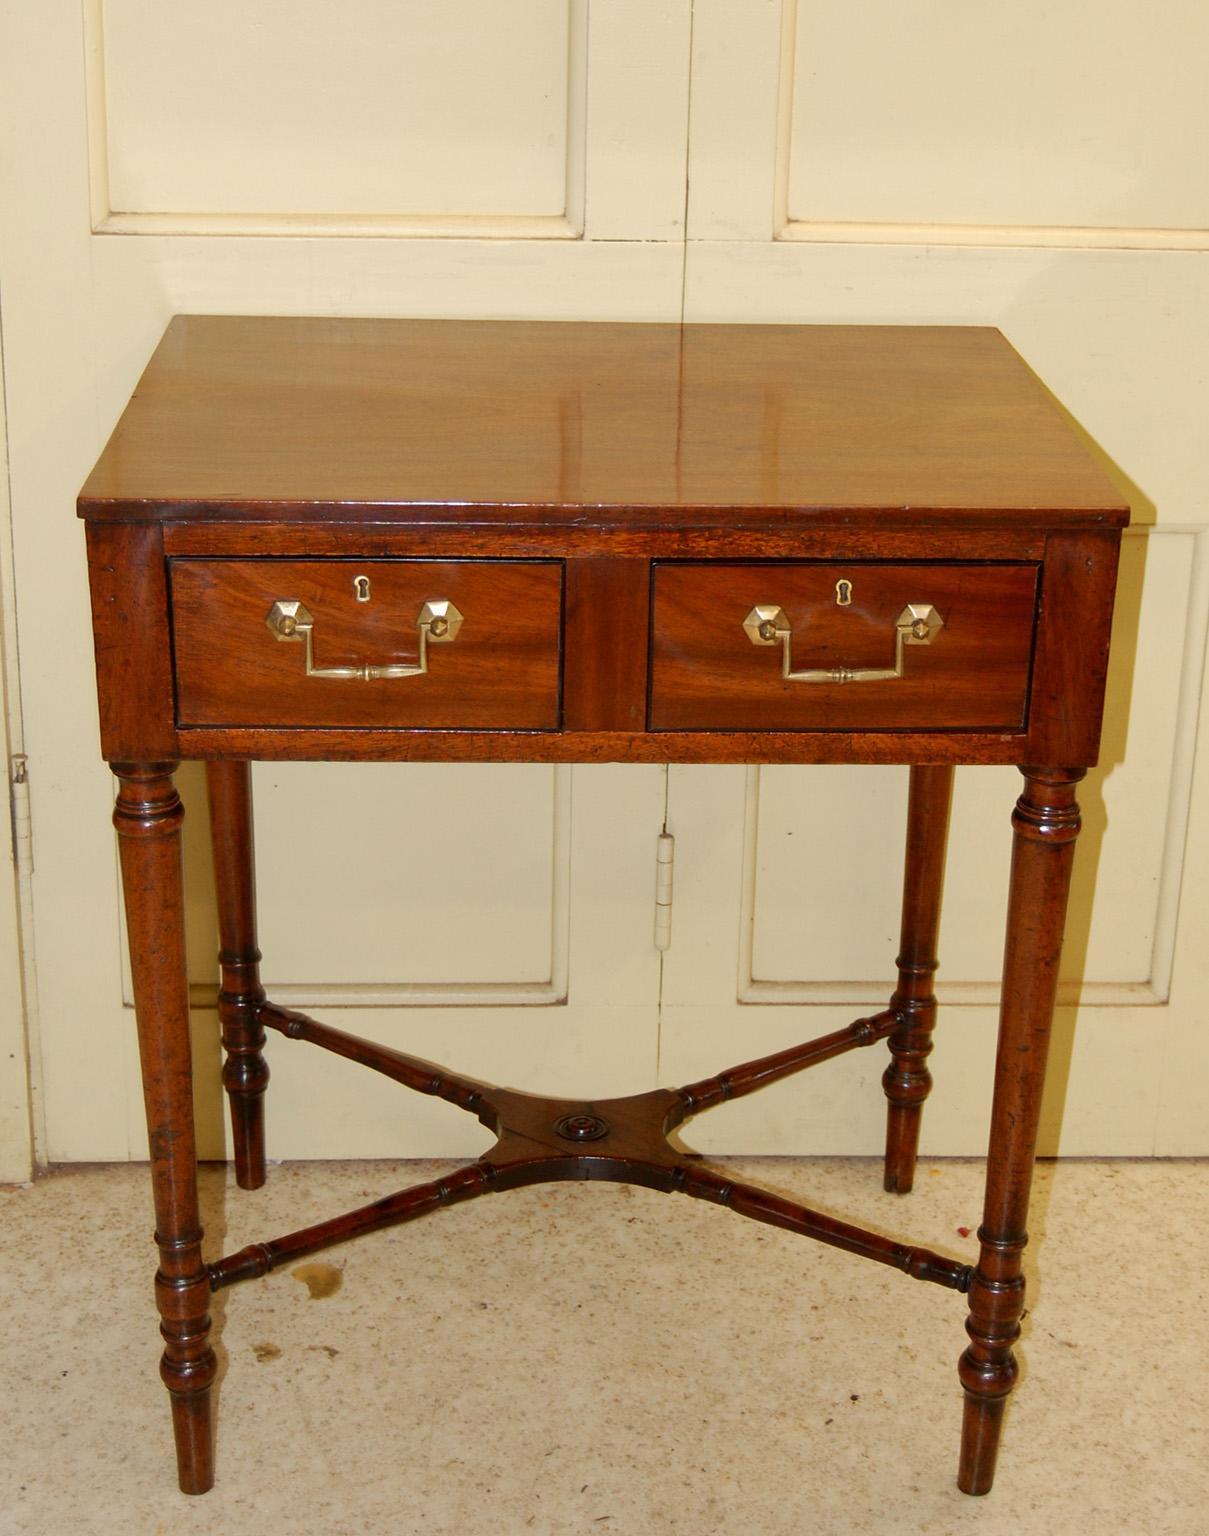   English Georgian Sheraton mahogany two drawer side table.  This handsome table is finished on all sides, has tapered turned legs and an elegant turned cross stretcher.  There is ebony line inlay to the edges of the two drawers.  Circa 1800. 